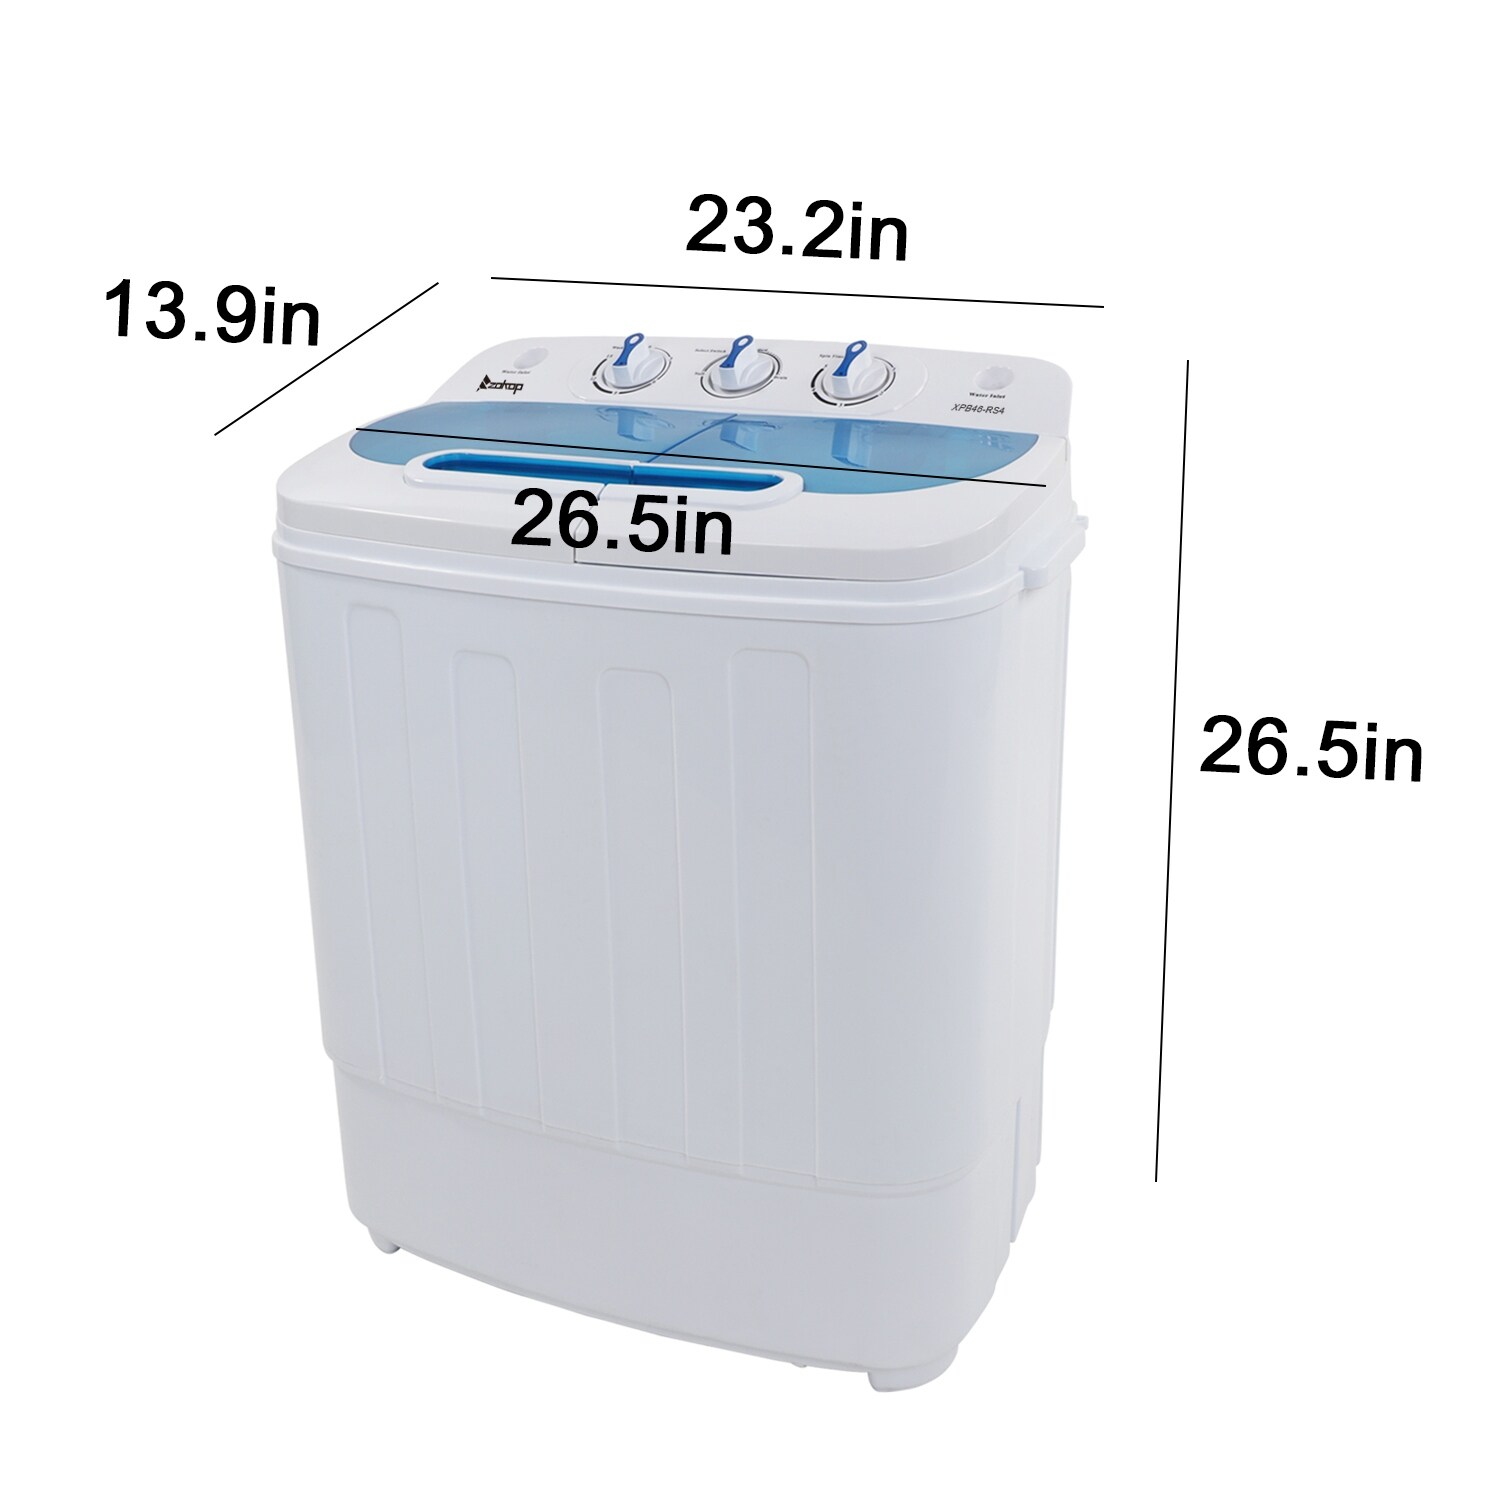 https://ak1.ostkcdn.com/images/products/is/images/direct/a8f8d8dbb9f3f3bba2266eaa45fe3b4c9e54bcde/13.4-lbs-Portable-Mini-Washing-Machine-Twin-Tub-Compact-Laundry-Machine-with-Drain-Pump.jpg